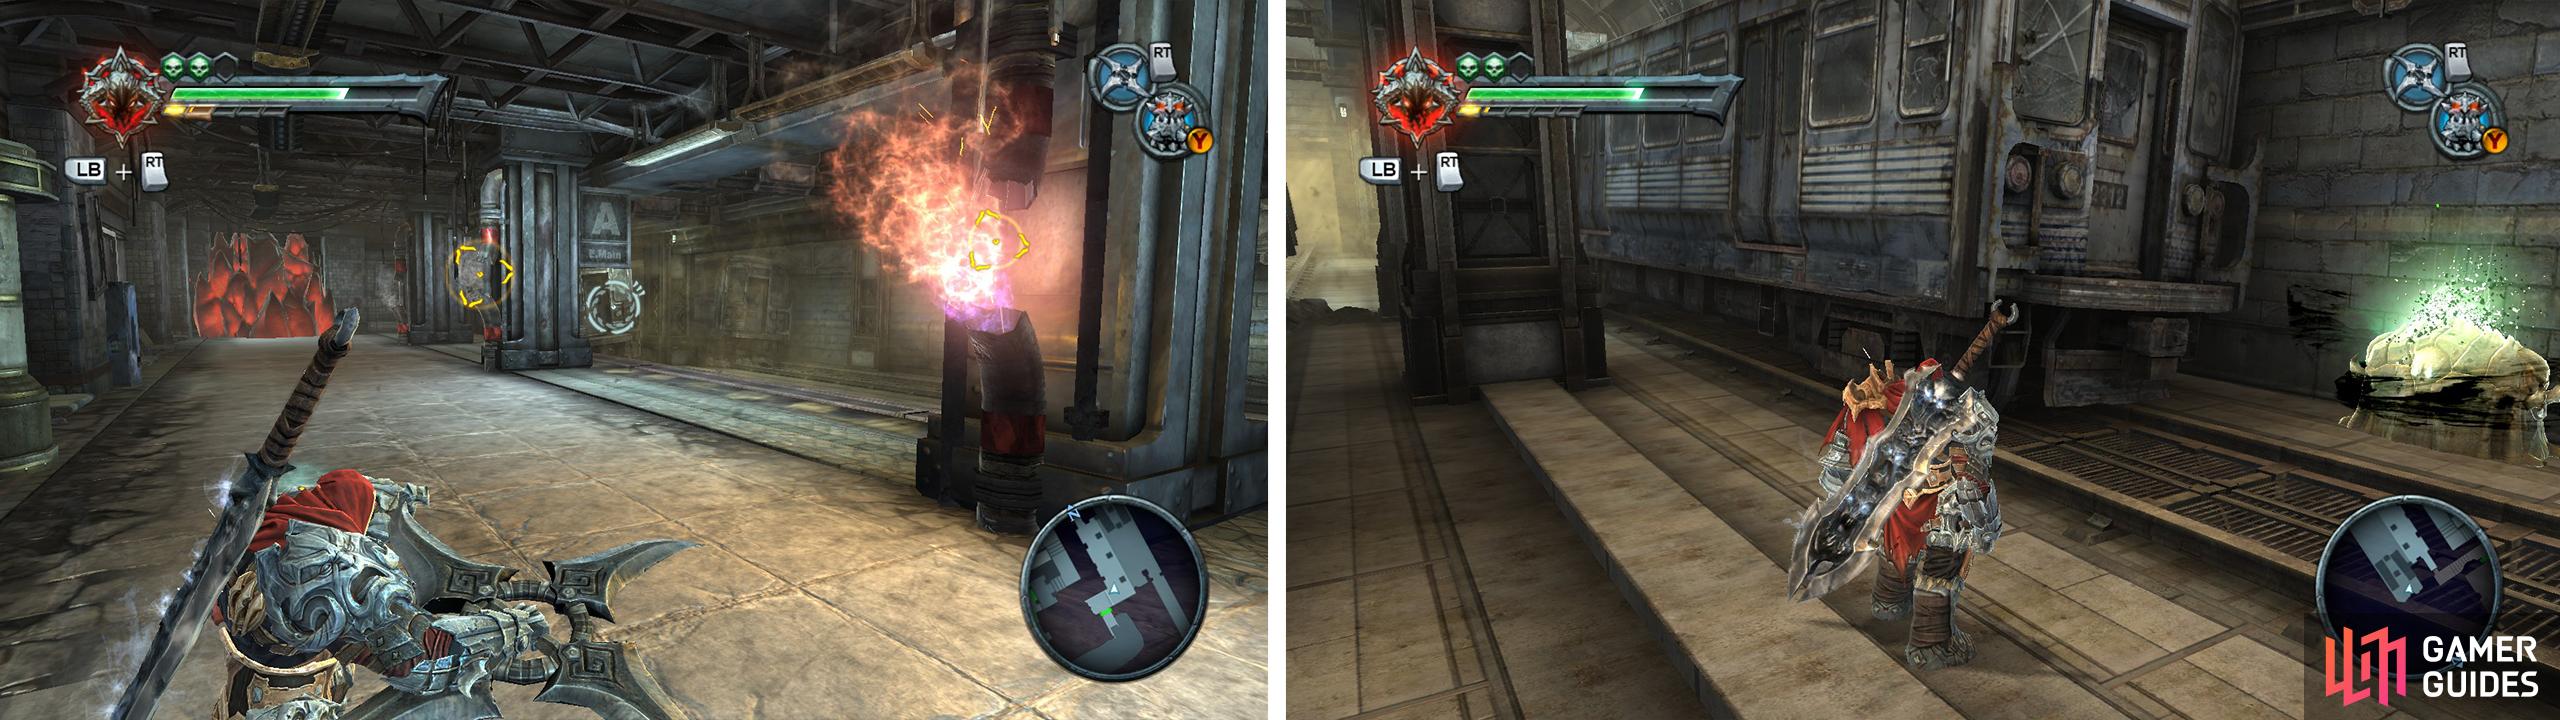 Use the cross-blade to light up the gas pipes (left) and look behind the traincars nearby for a Life Stone Shard (right).